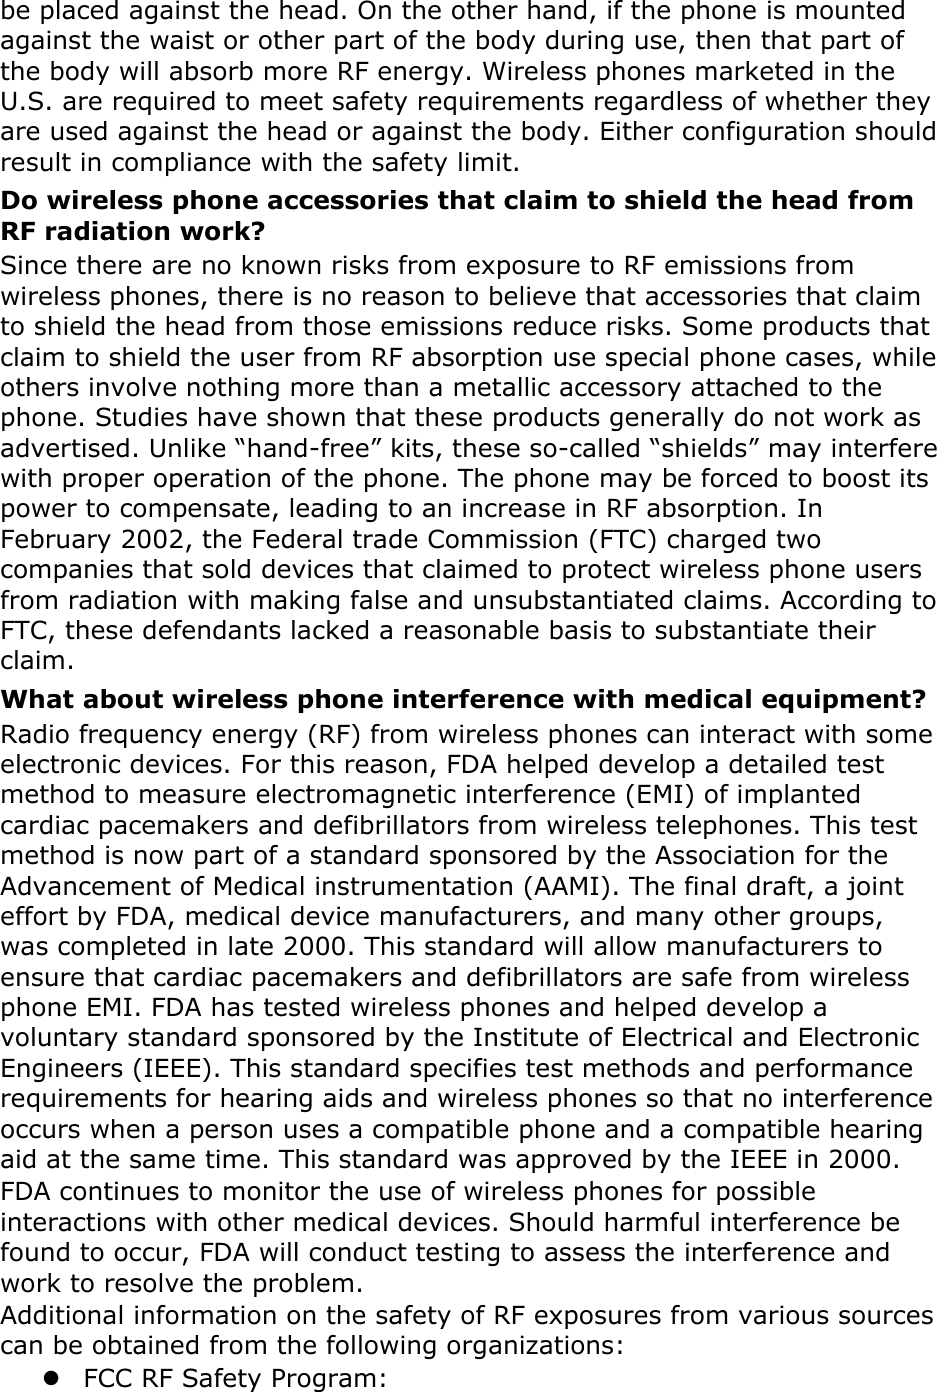 Page 12 of Samsung Electronics Co GTI9070P Cellular/PCS GSM/EDGE/WCDMA Phone with WLAN, RFID and Bluetooth User Manual